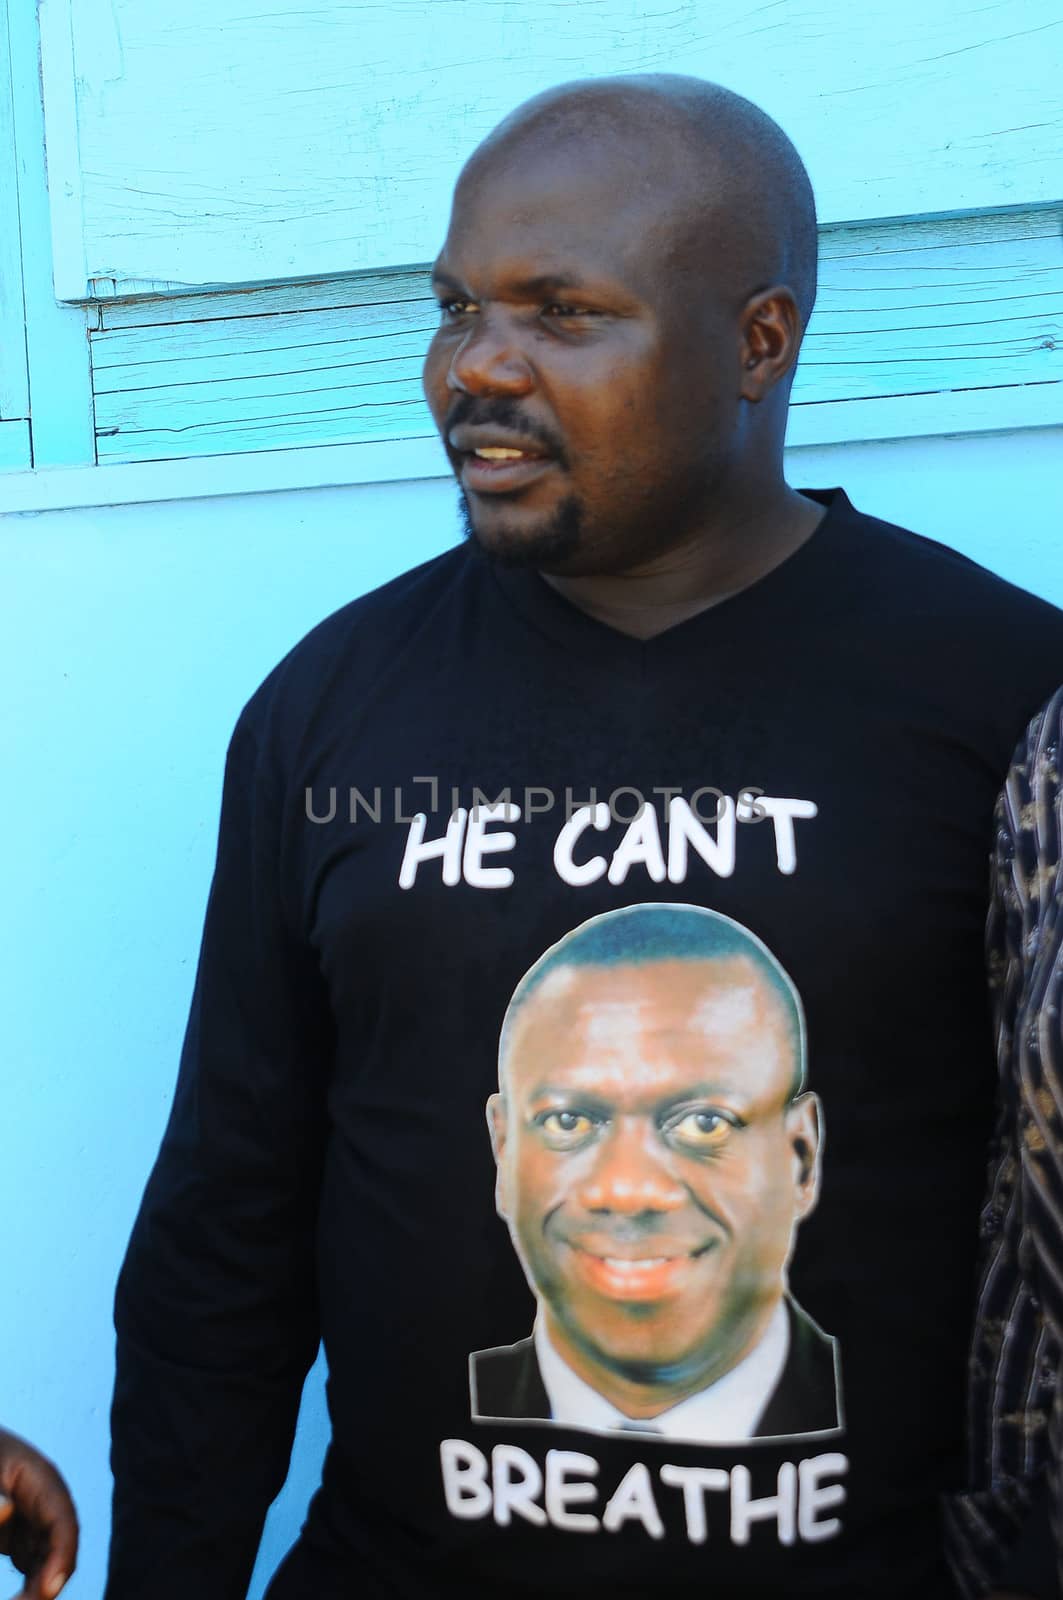 UGANDA, Kampala: Mubarak Munyagwa, a member of Parliament and supporter of former Uganda's Presidential Candidate and opposition leader Kizza Besigye, wears a T-shirt with the effigy of Kizza Besigye, during the Free my vote campaign launch in Kampala, on March 15, 2016. The Free my vote campaign, that includes praying every Tuesday around the country, is organized by the FDC (Forum for Democratic Change) in protest of the outcome of the February 18 presidential election and the subsequent home detention of the party's presidential candidate Dr Kizza Besigye who has been under police siege since the declaration of presidential results.